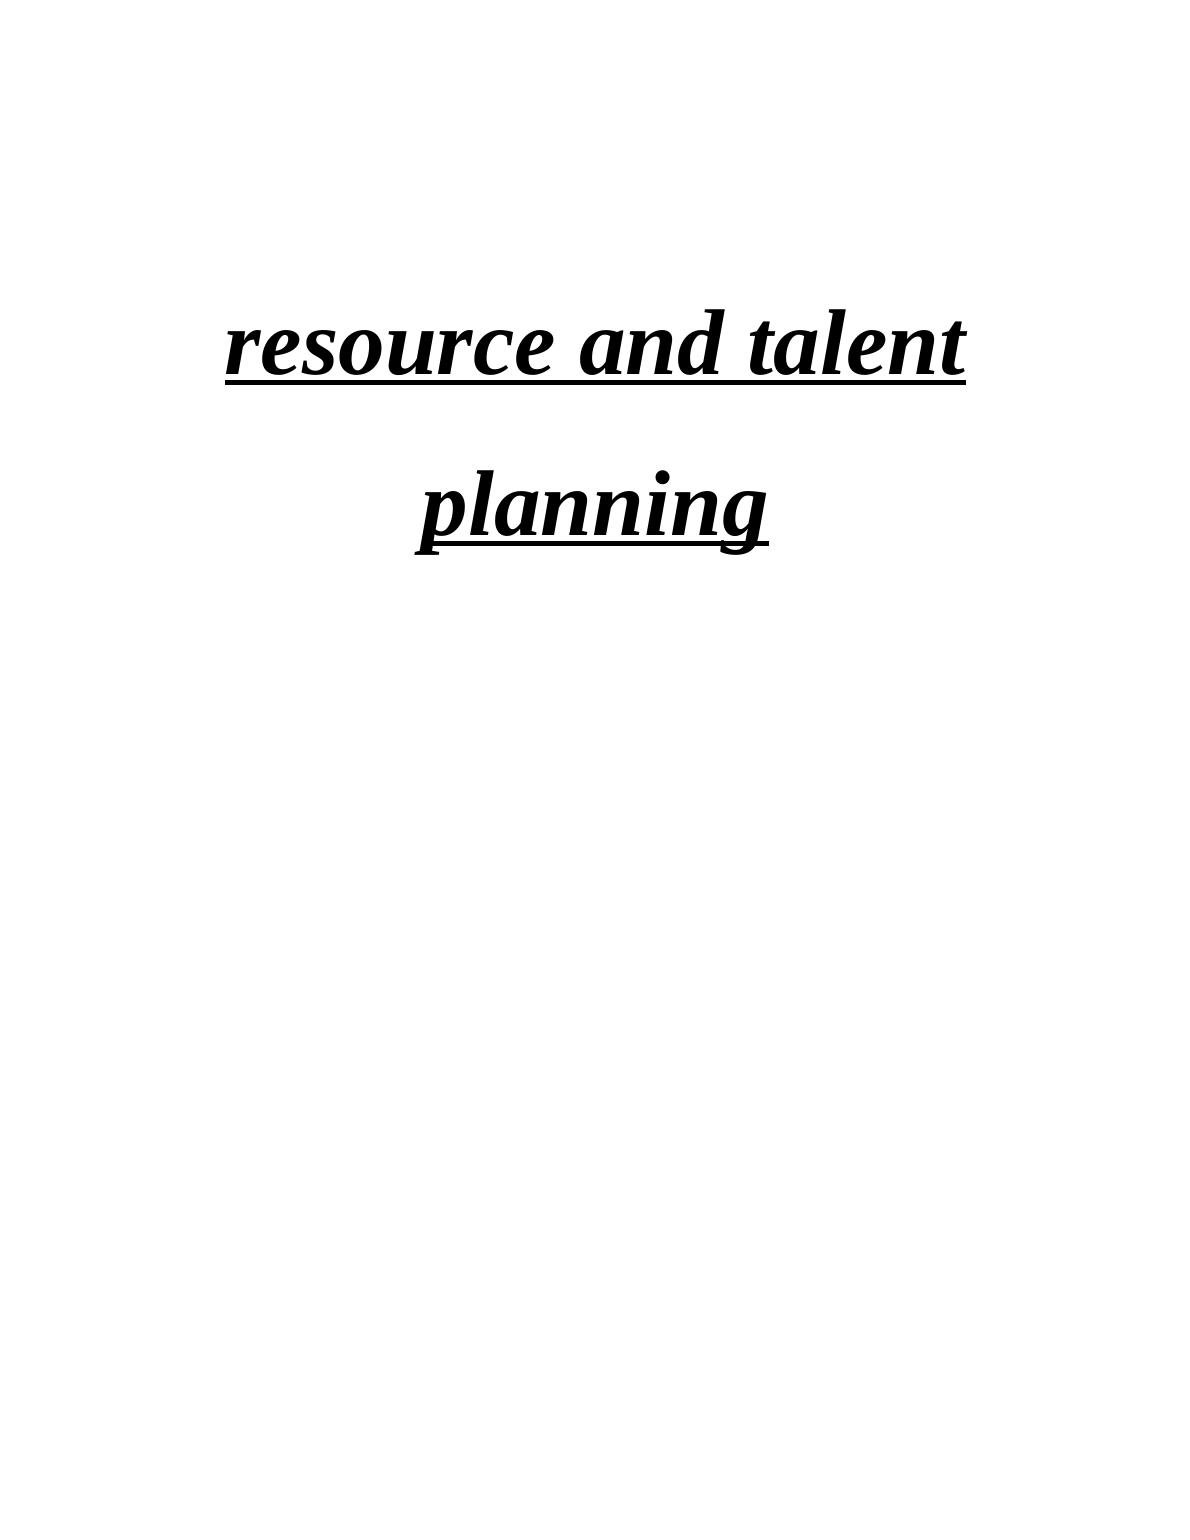 Talent Management and Workplace Planning_1